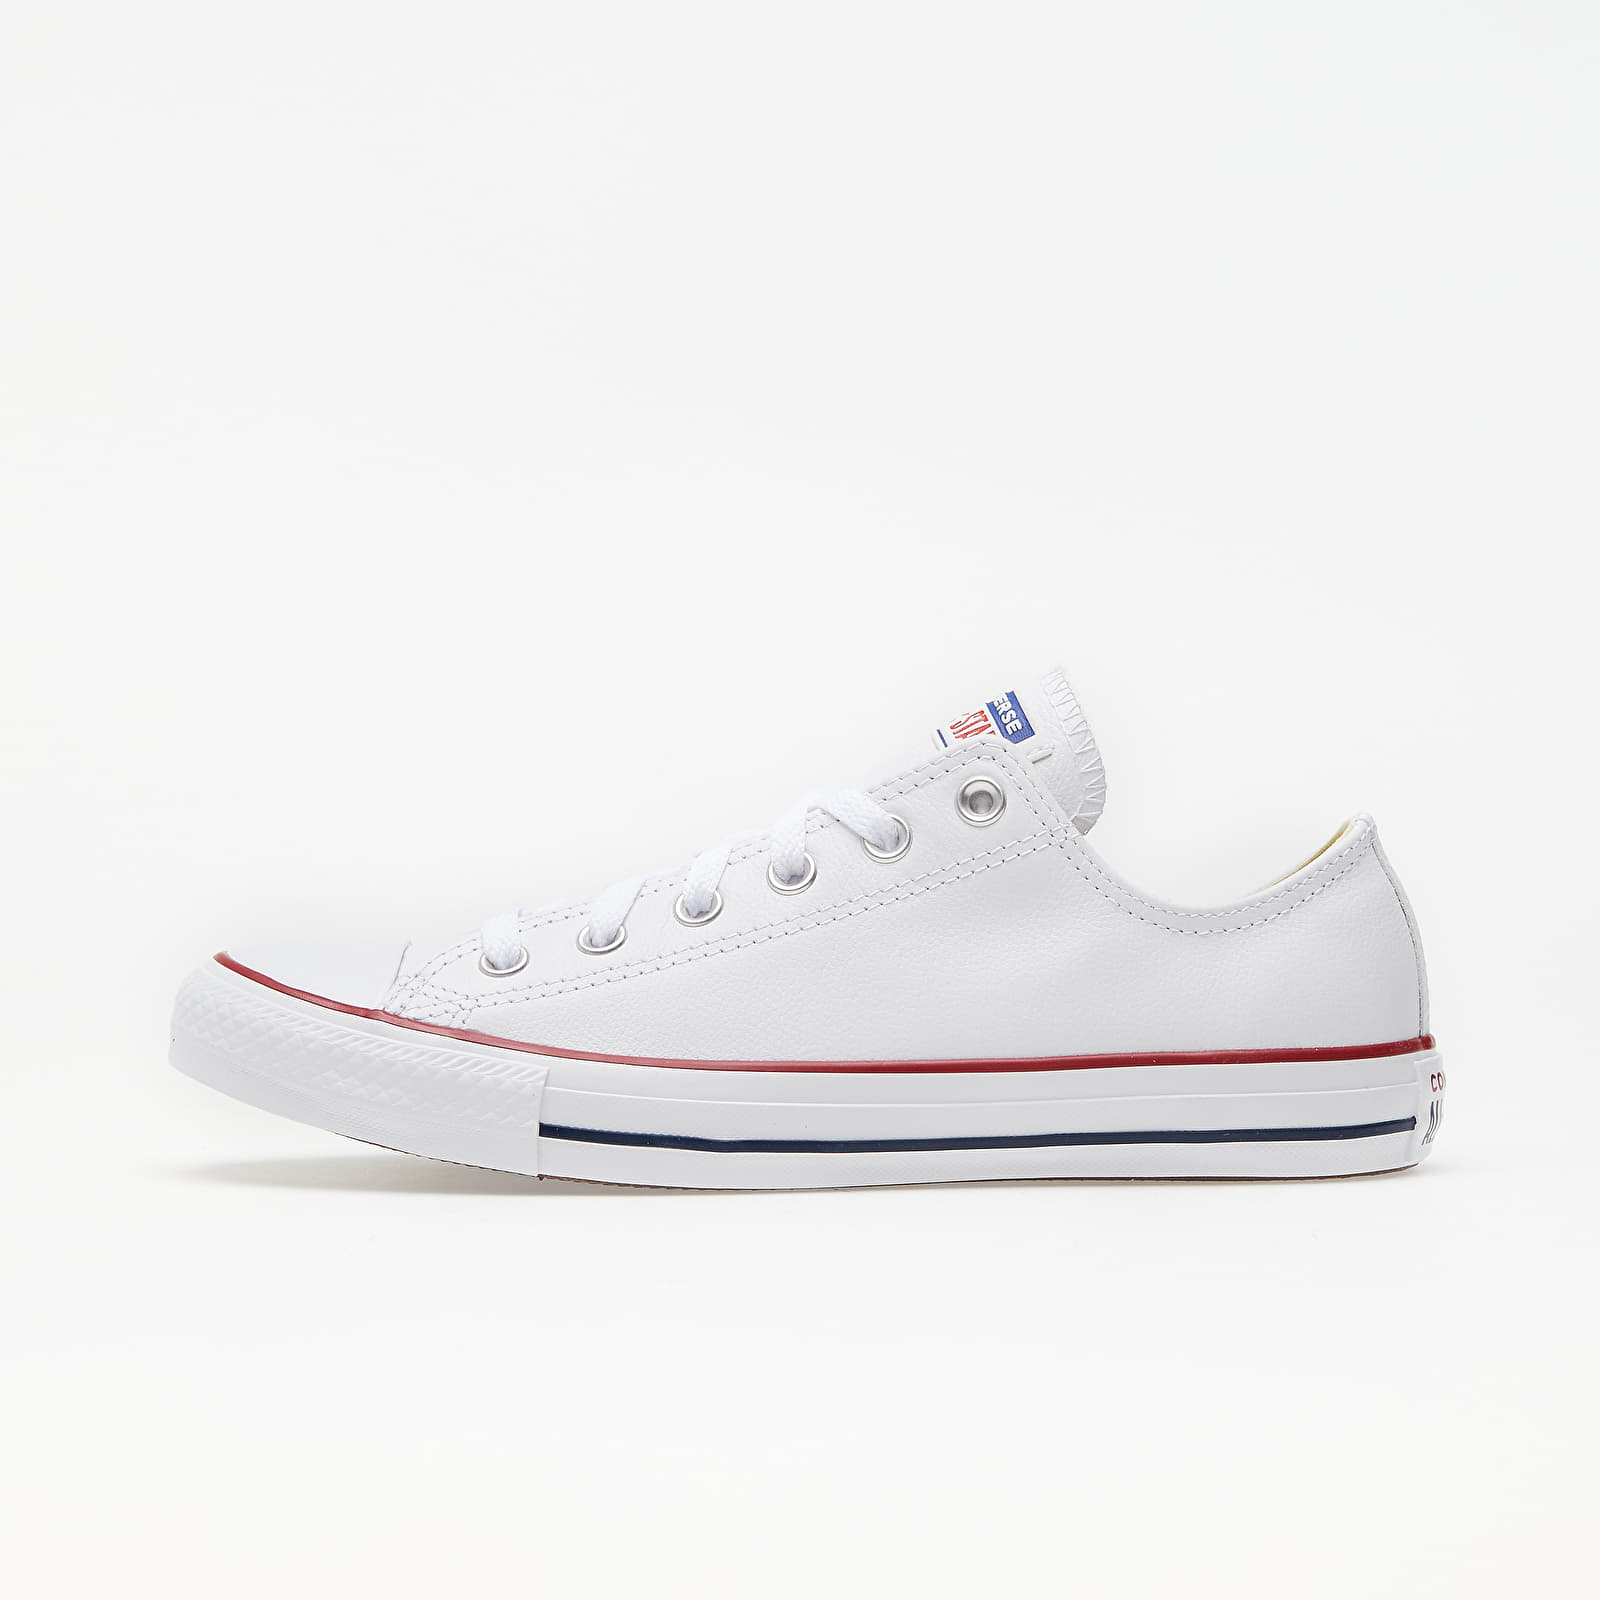 Women's shoes Converse Chuck Taylor All Star OX White